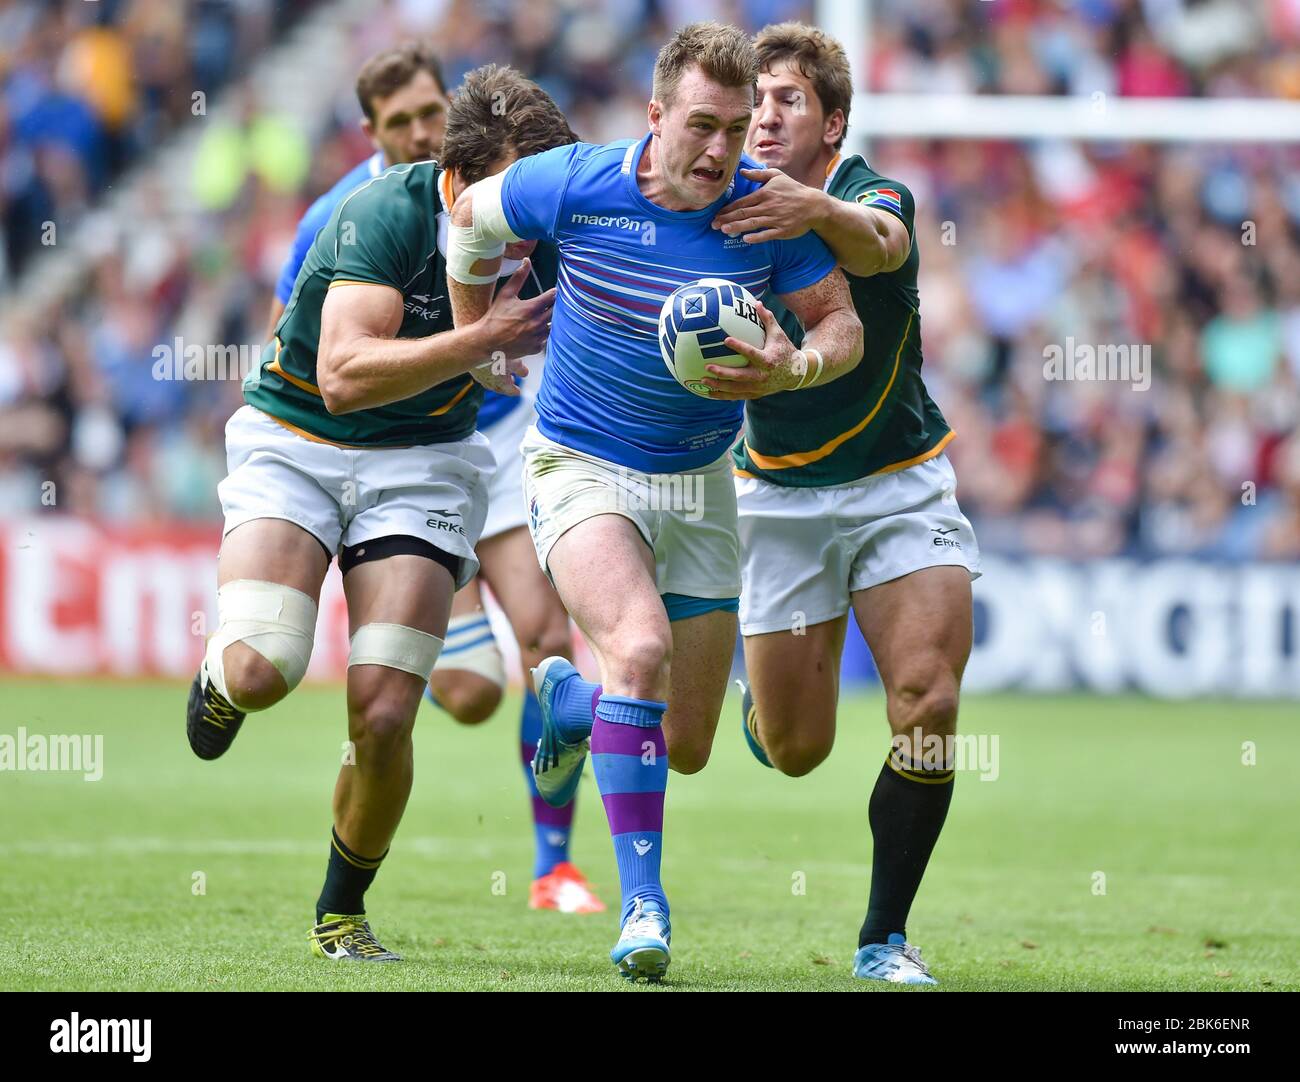 Scotland's Stuart Hogg is tackled by South Africa's Warren Whiteley and Kwagga Smith during the 2014 Commonwealth Games, Ibrox Stadium, Glasgow. Stock Photo